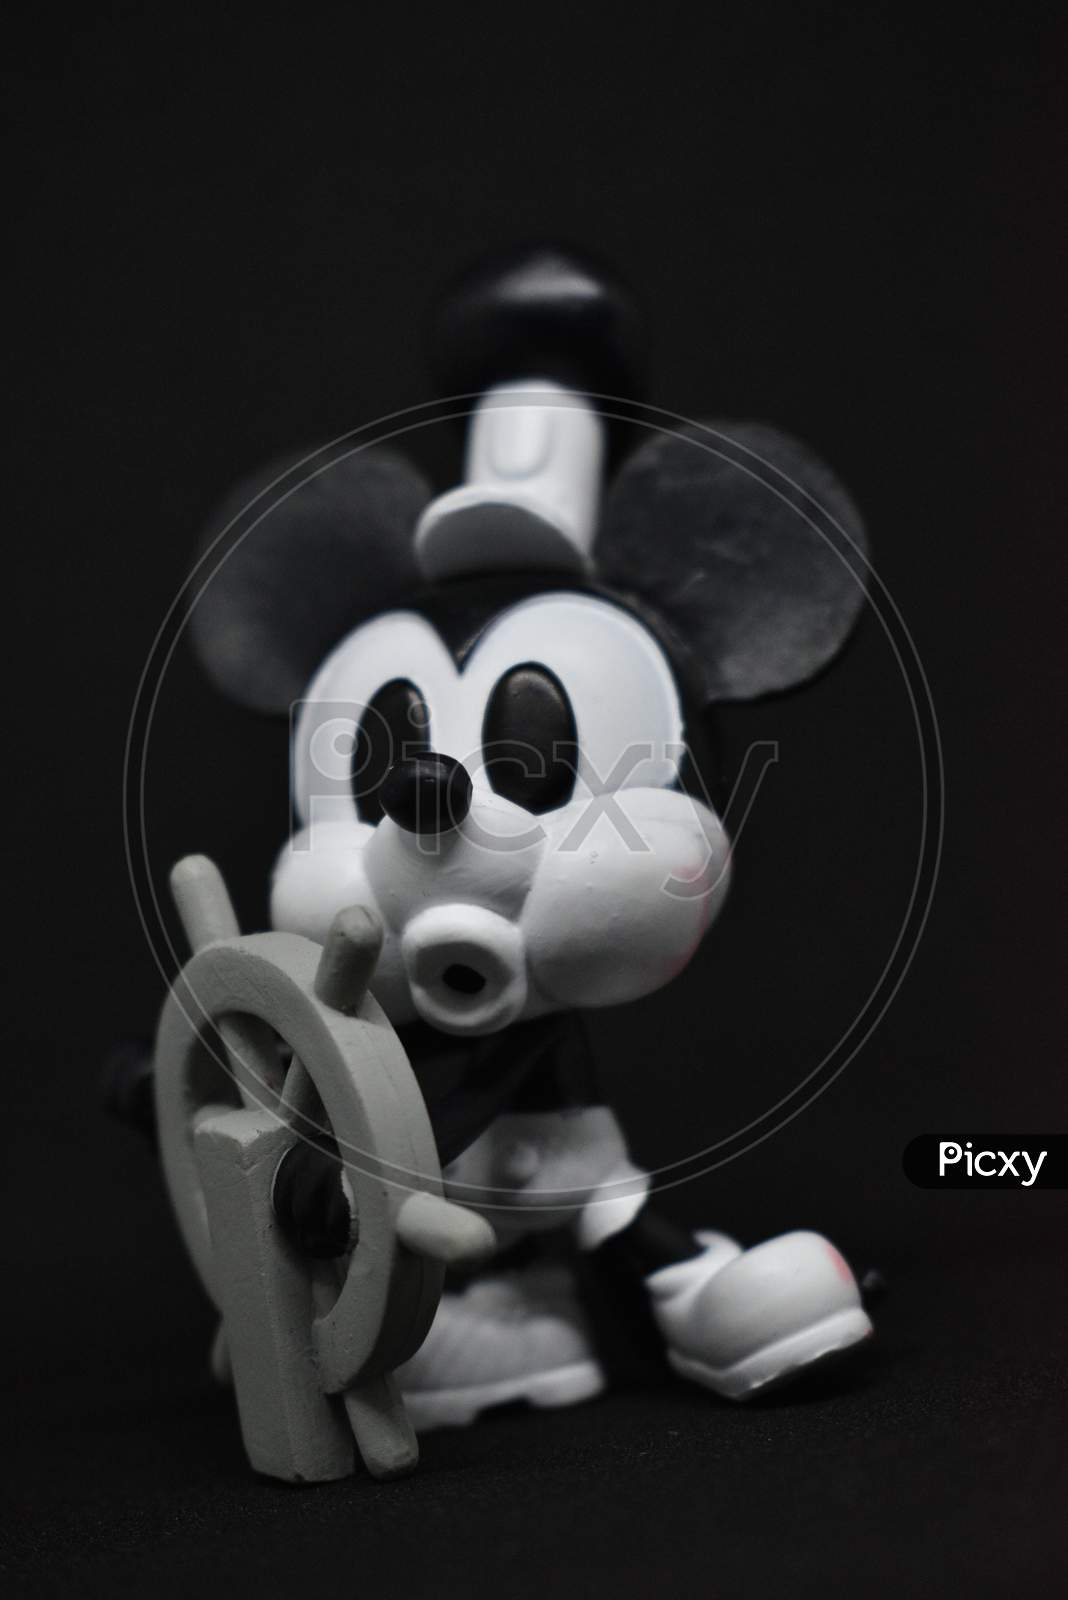 Image Of Steamboat Willie Mickey Mouse On Black Background. SN152518 Picxy